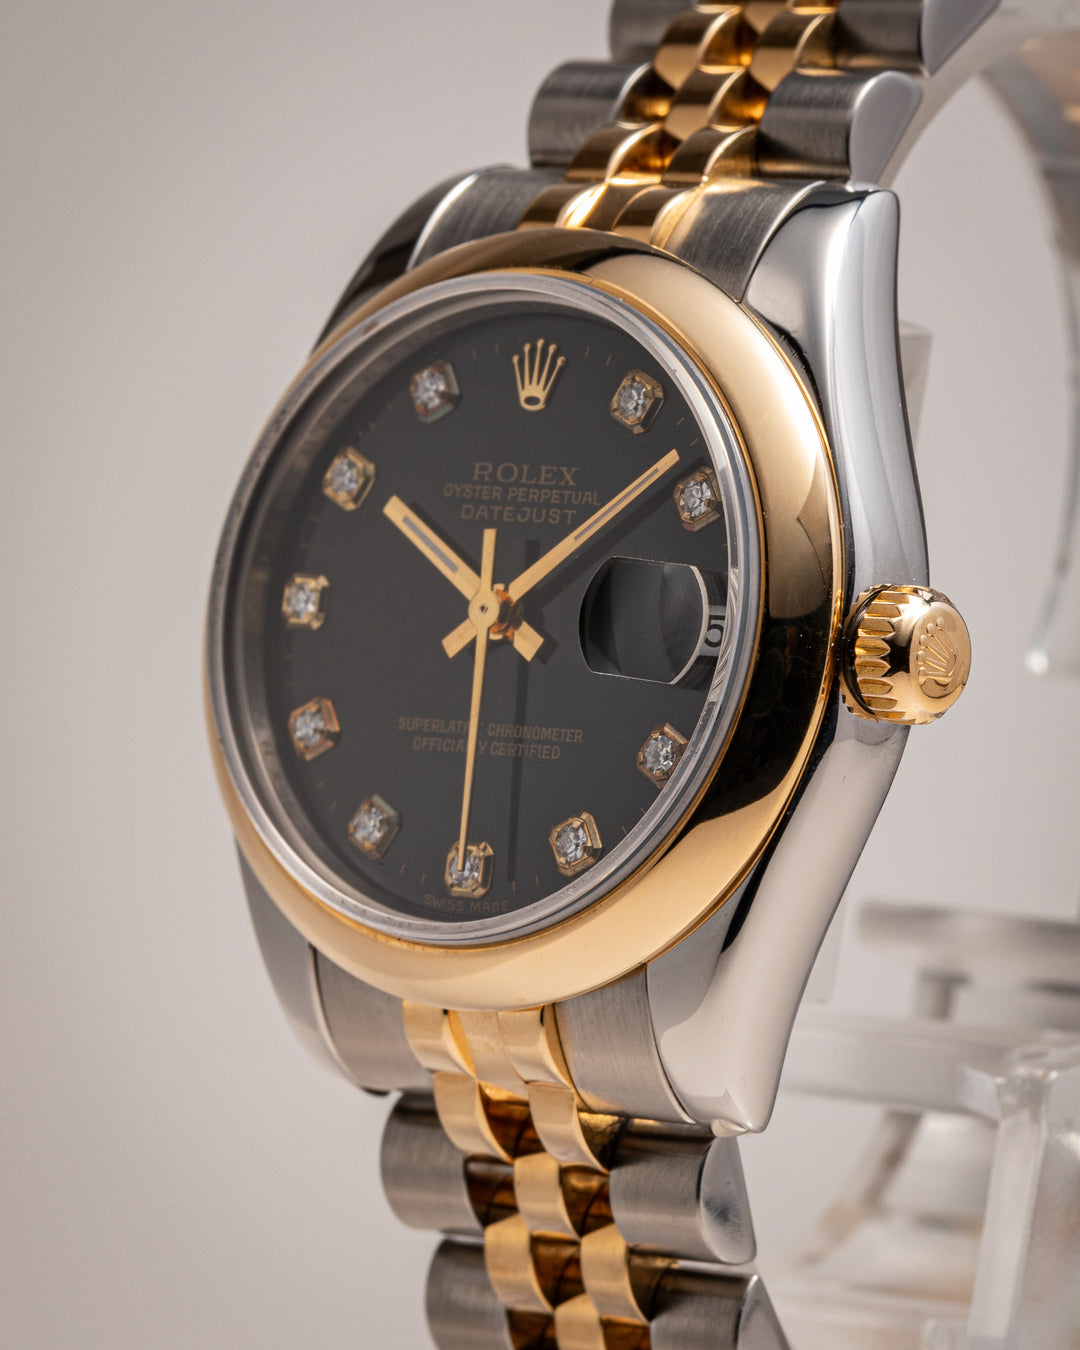 Rolex Stainless Steel and 18k Yellow Gold Datejust (178263)